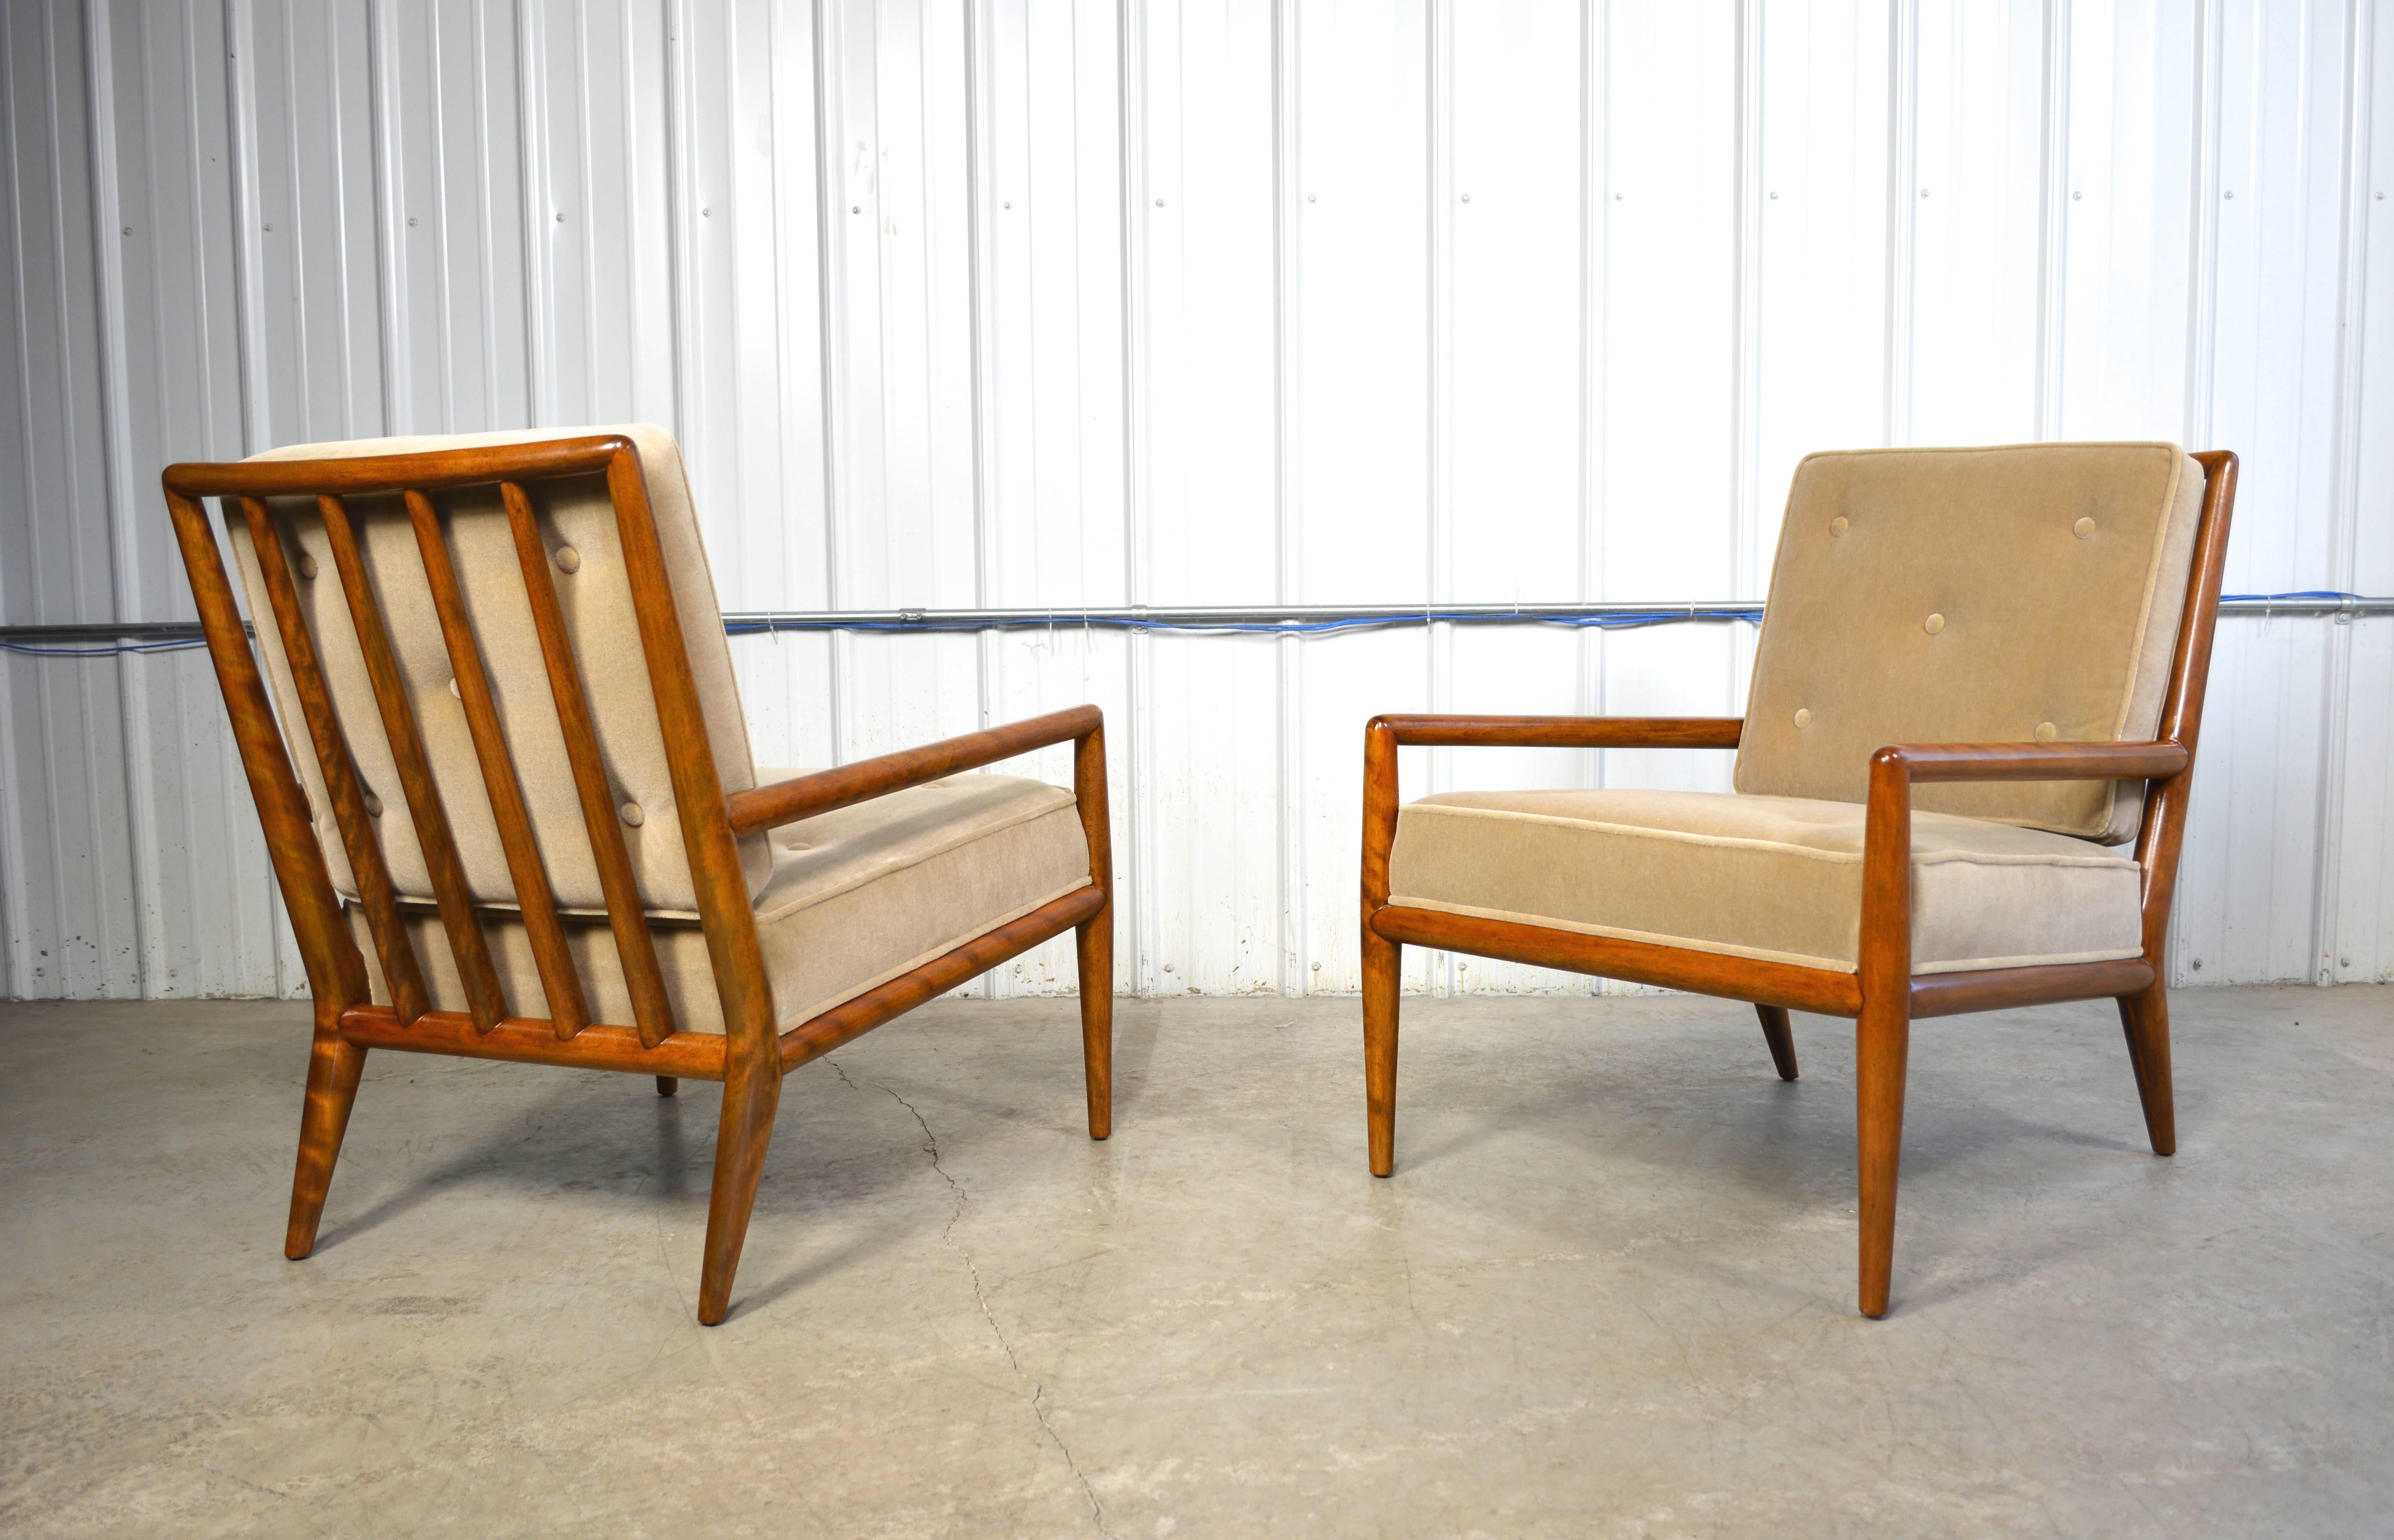 A pair of lounge chairs designed by T.H. Robsjohn-Gibbings for Widdicomb. The solid wood frames have been refinished to reflect their original color. New cushions are upholstered in neutral Belgian mohair.